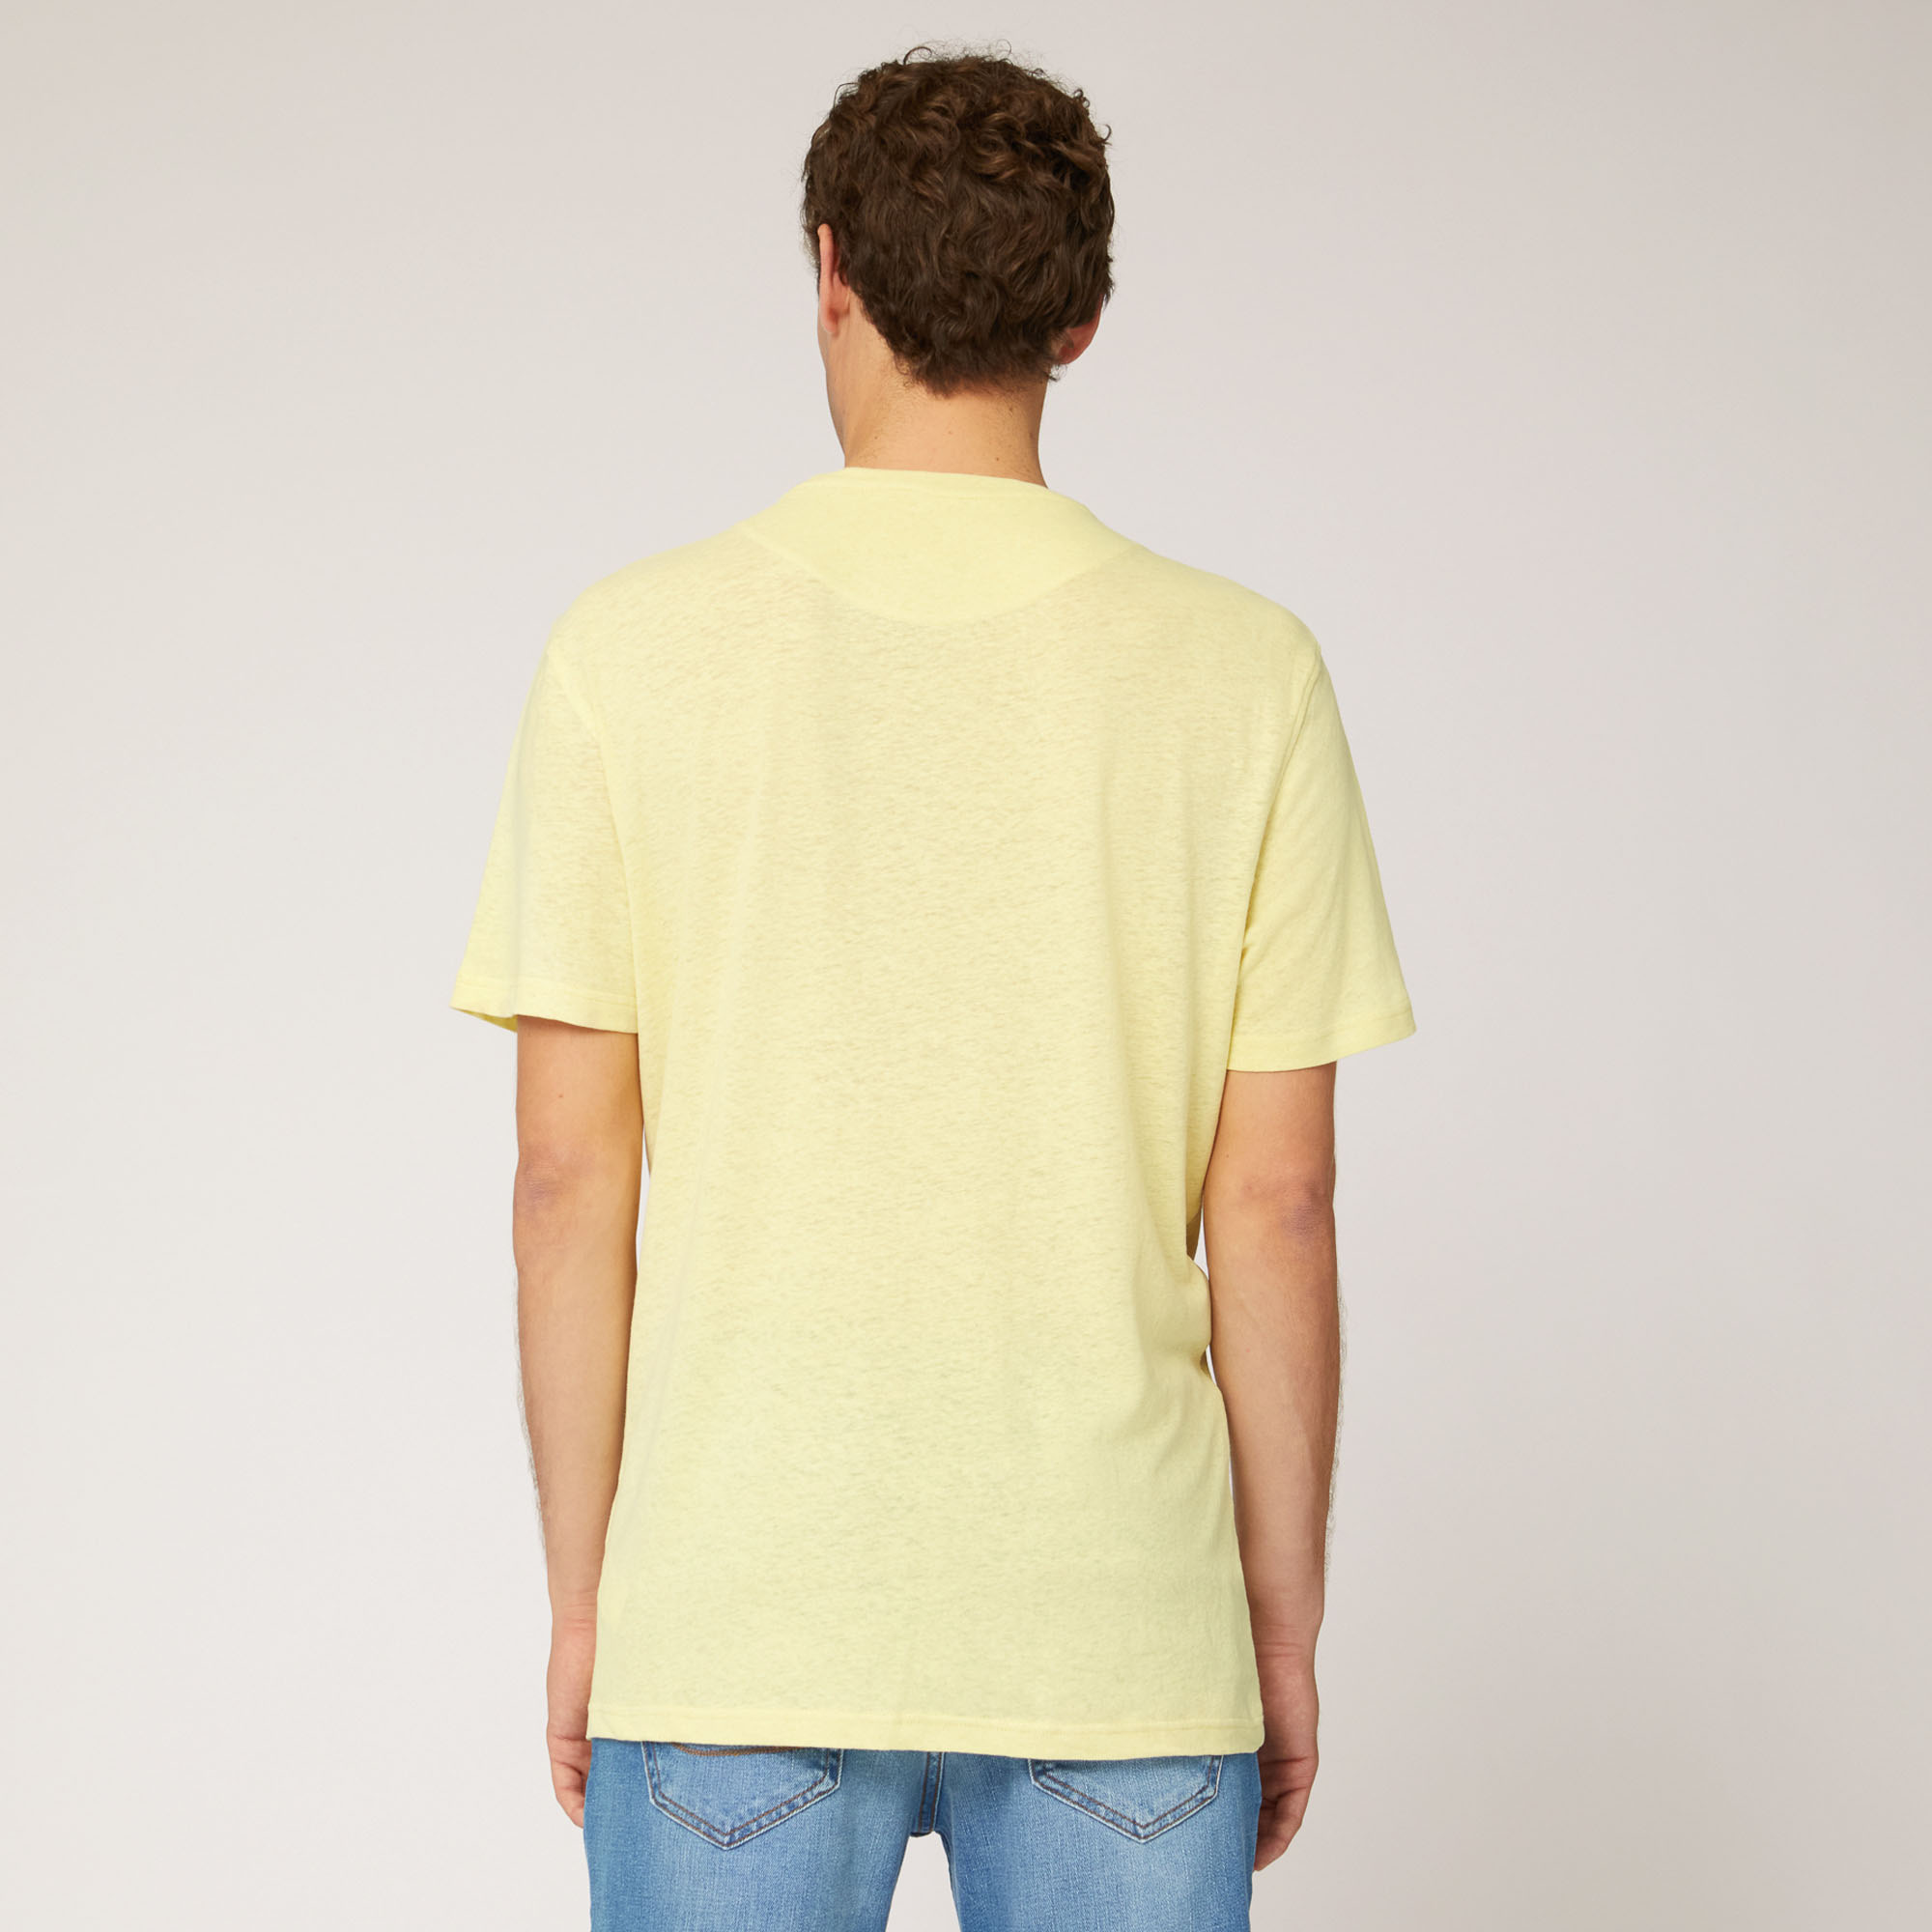 Linen and Cotton T-Shirt, Light Yellow, large image number 1